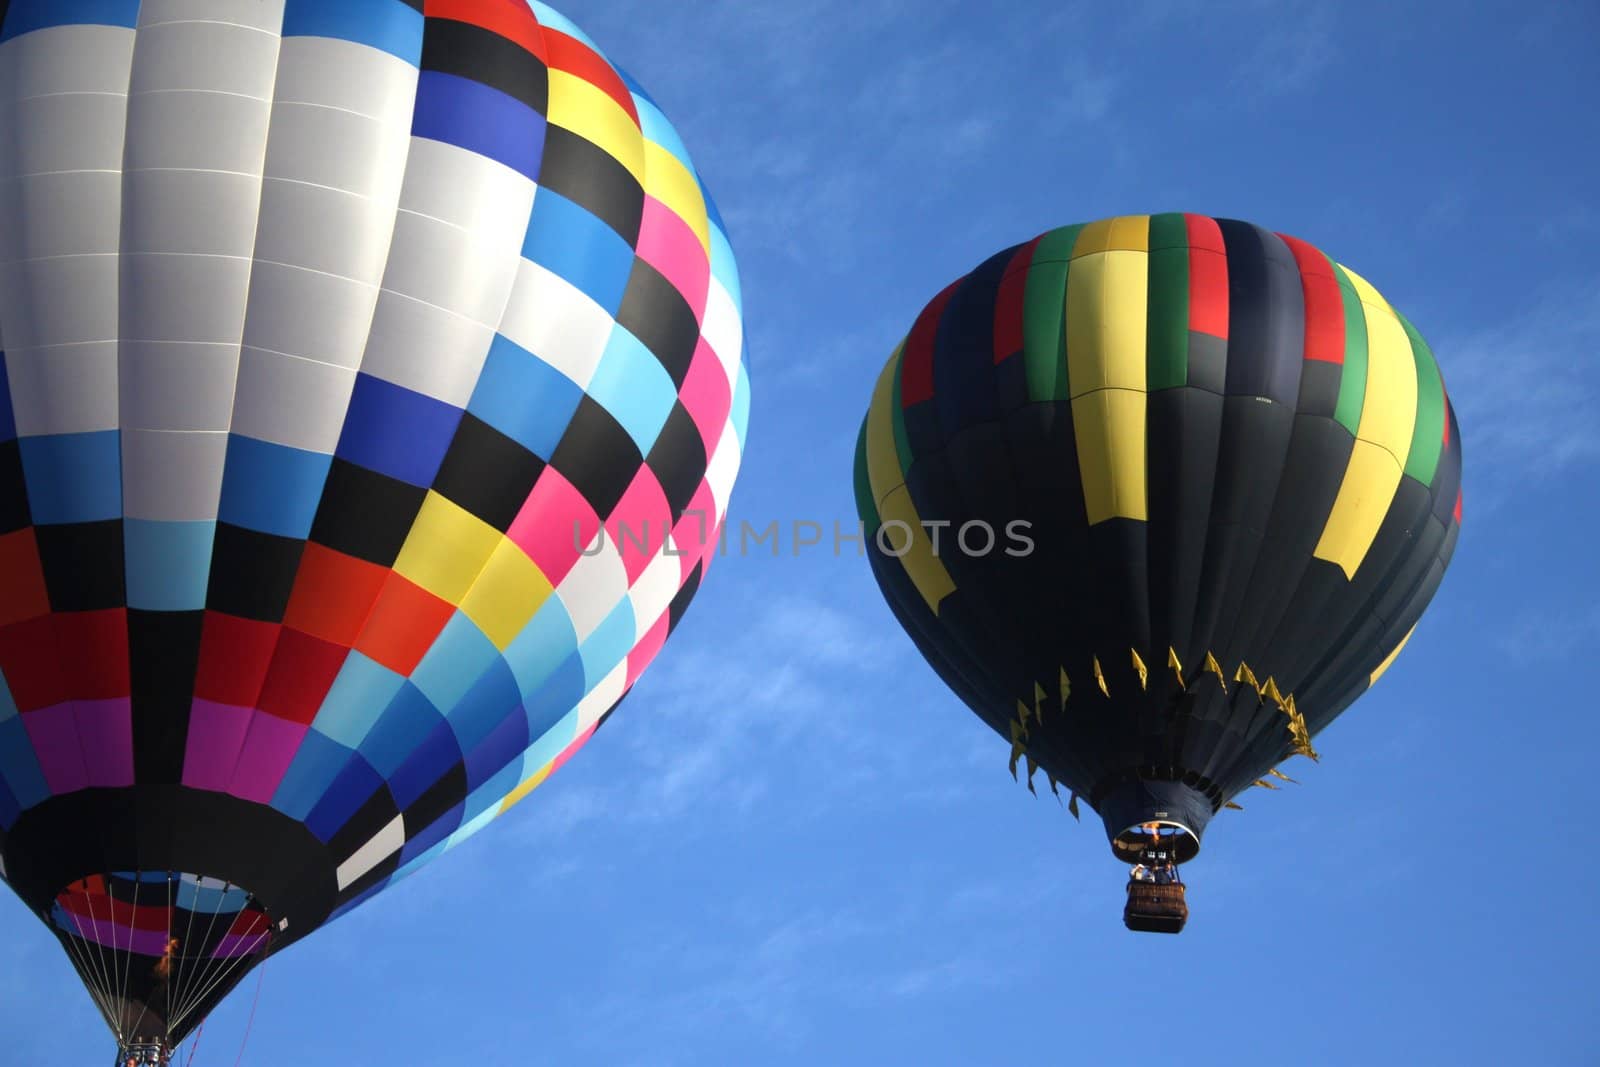 Pair of hot air balloons flying accross a blue sky